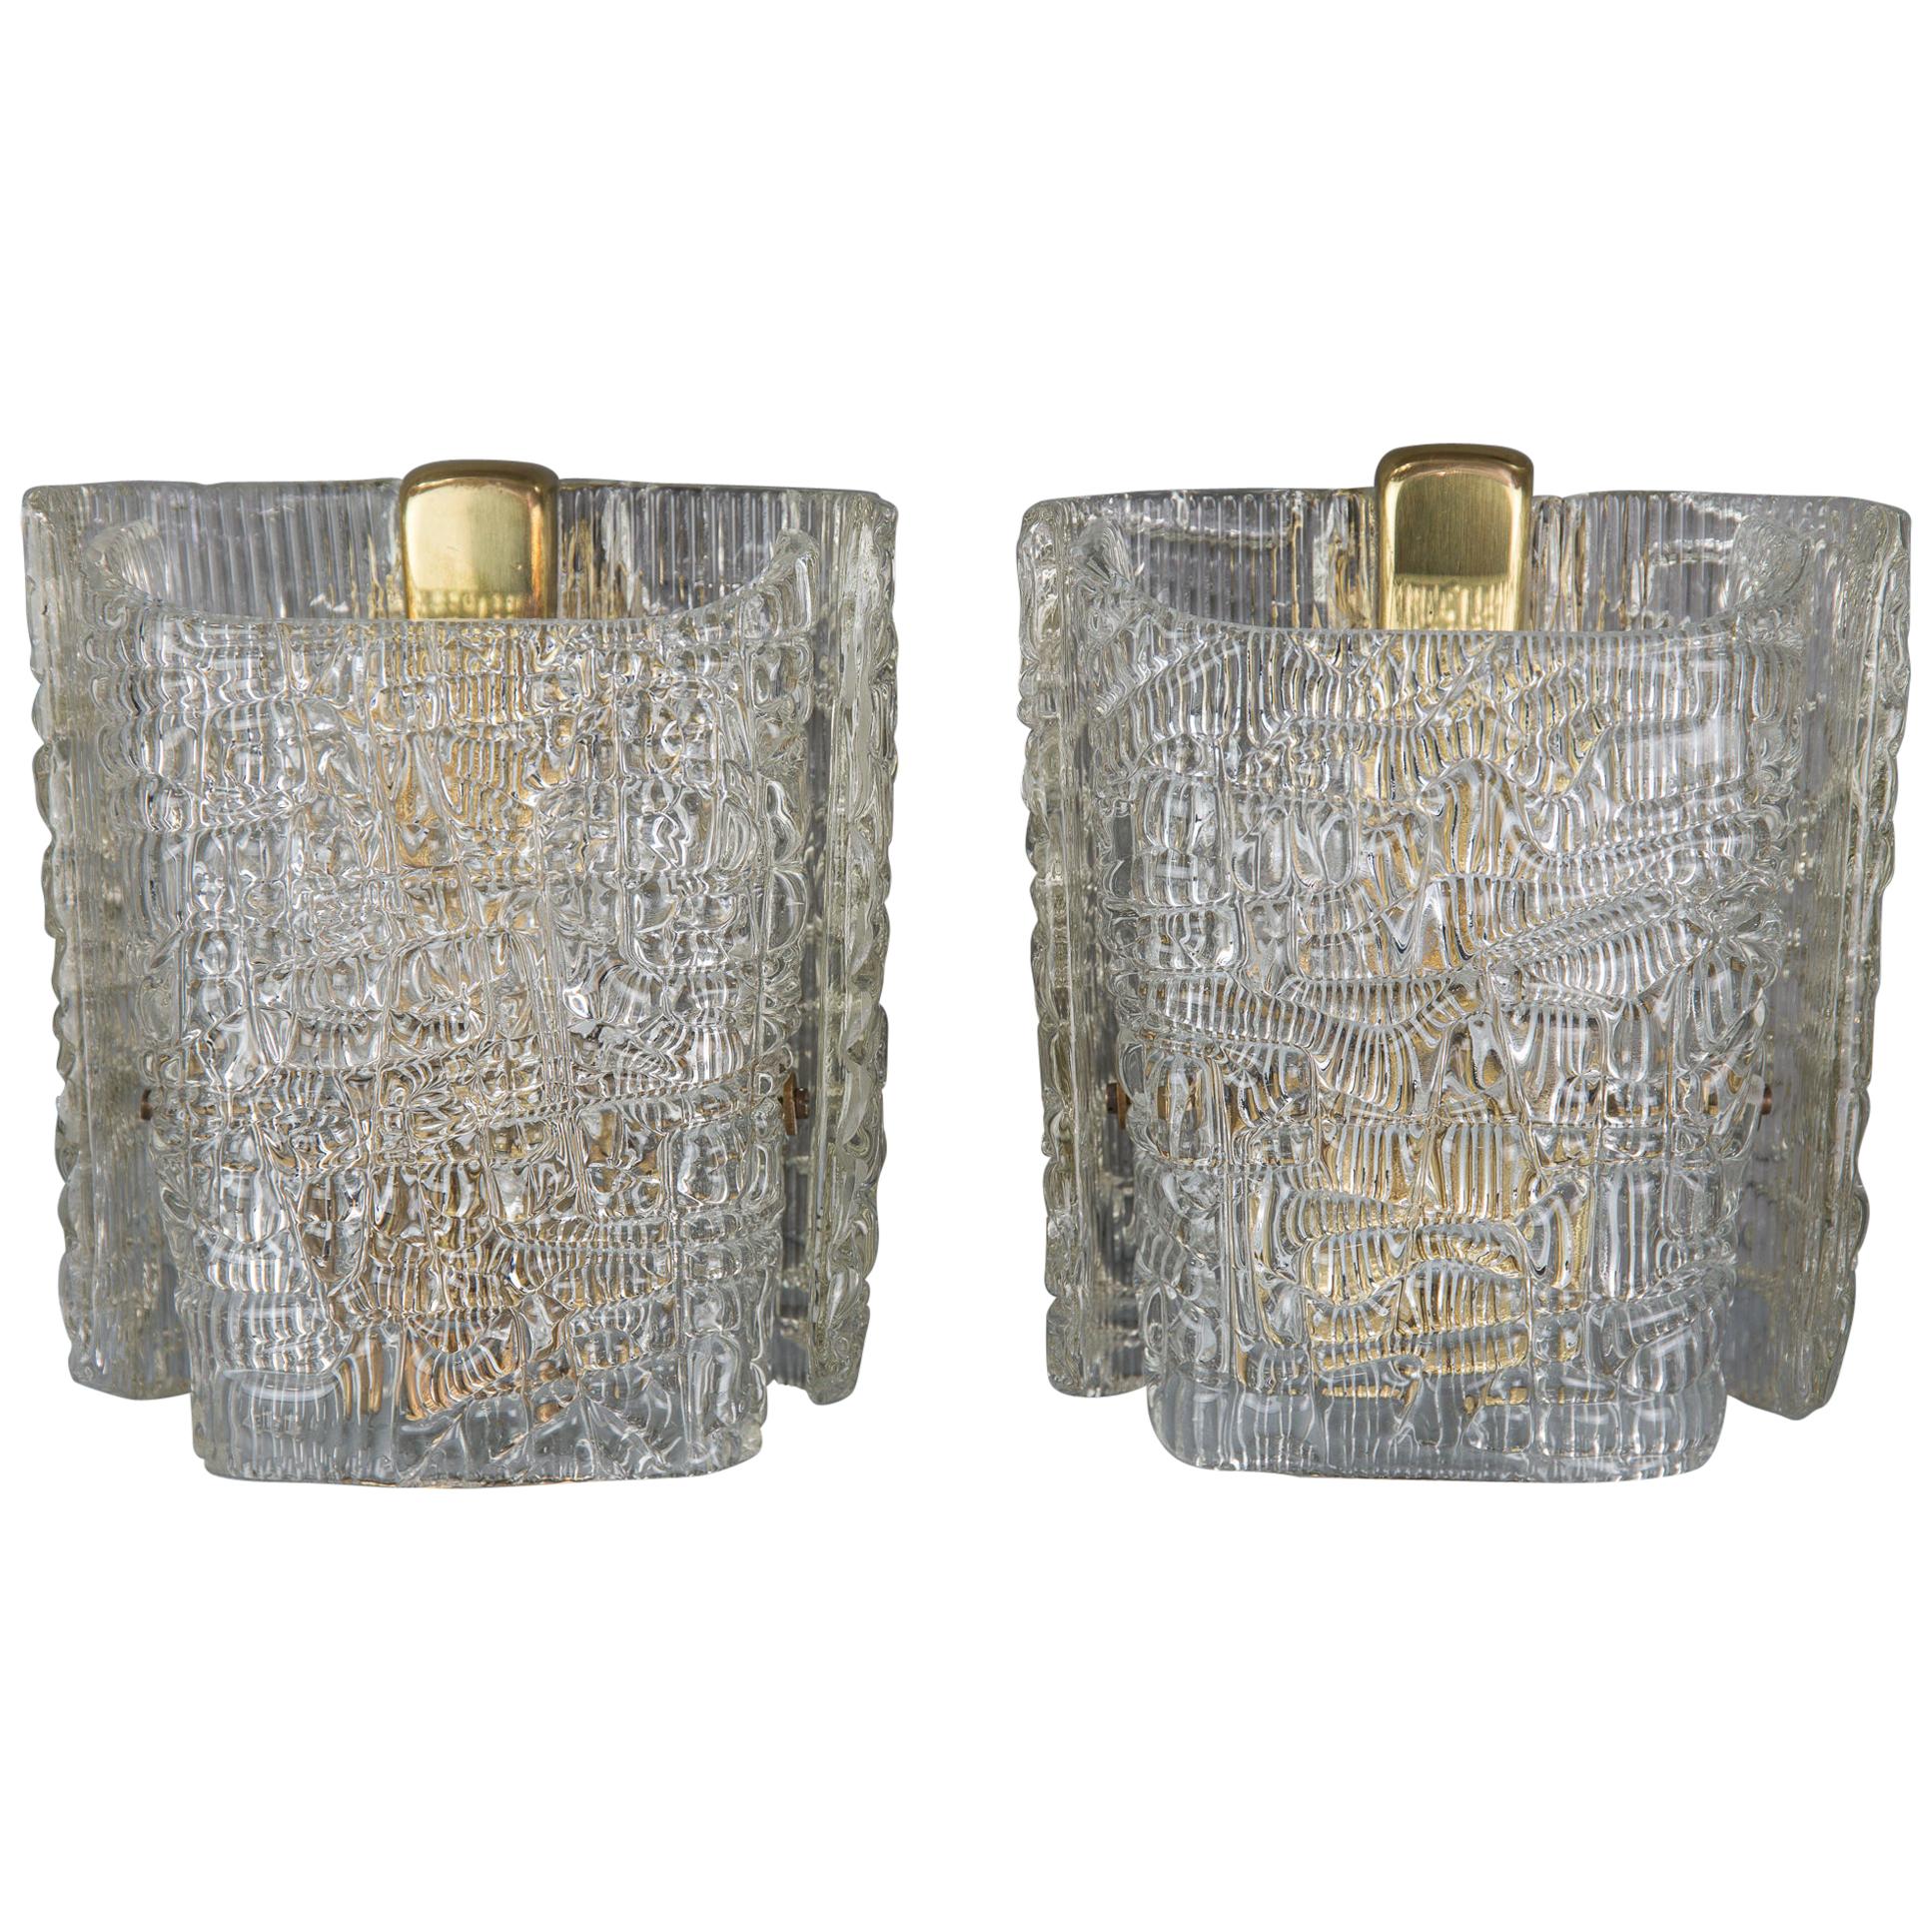 Two J.T.Kalmar Wall Lamps circa 1950s with Texured Glass